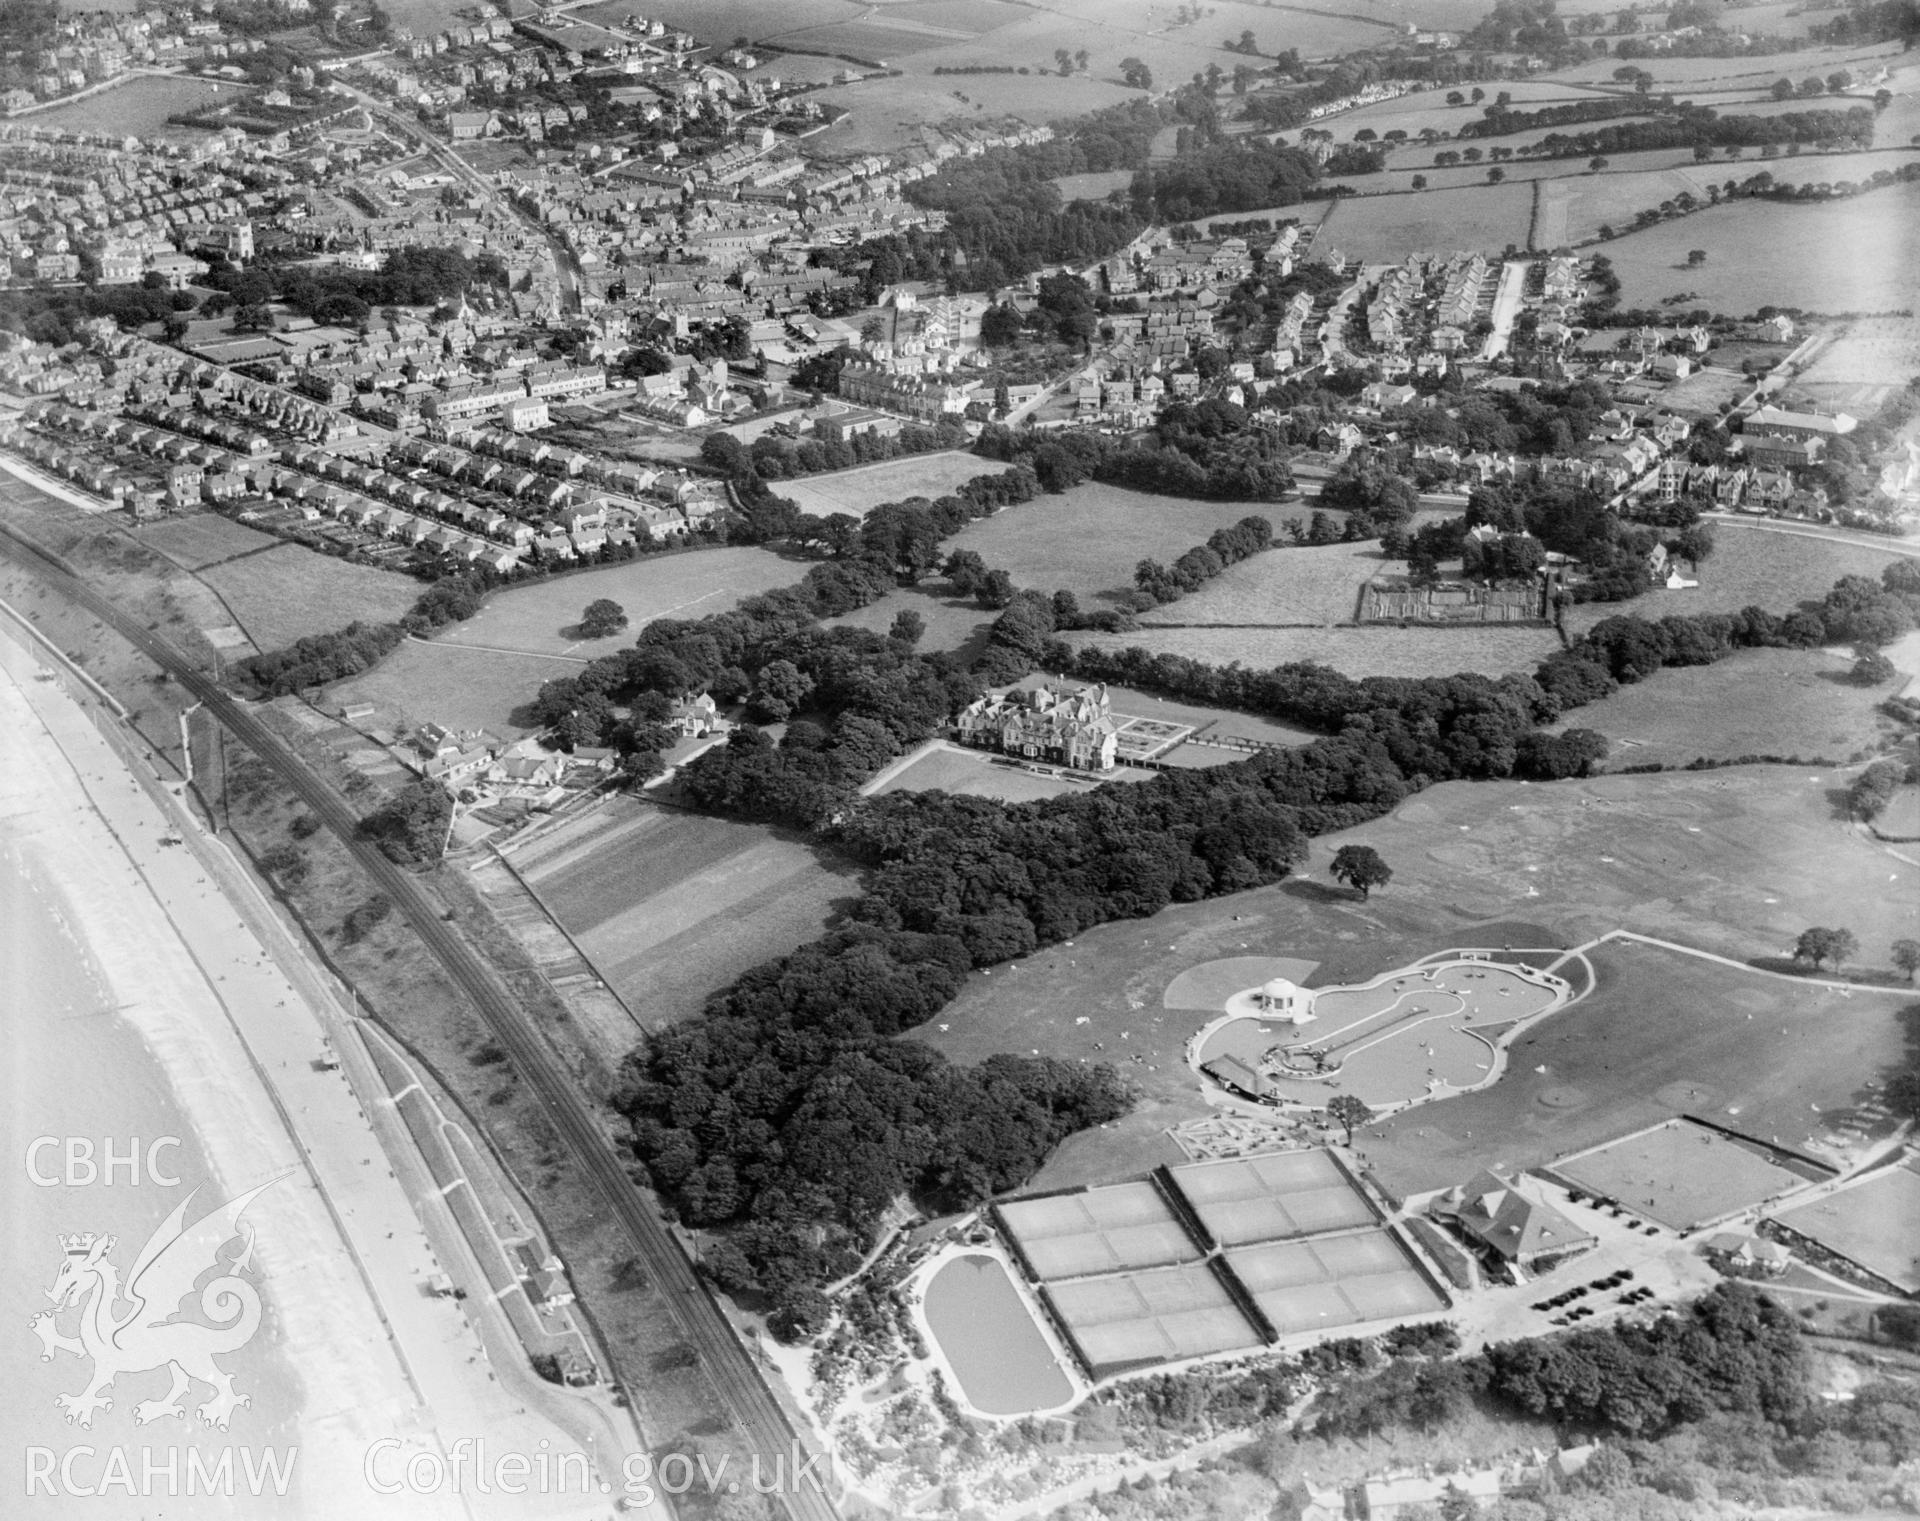 View of Colwyn Bay showing Glan-y-Don and park, oblique aerial view. 5?x4? black and white glass plate negative.